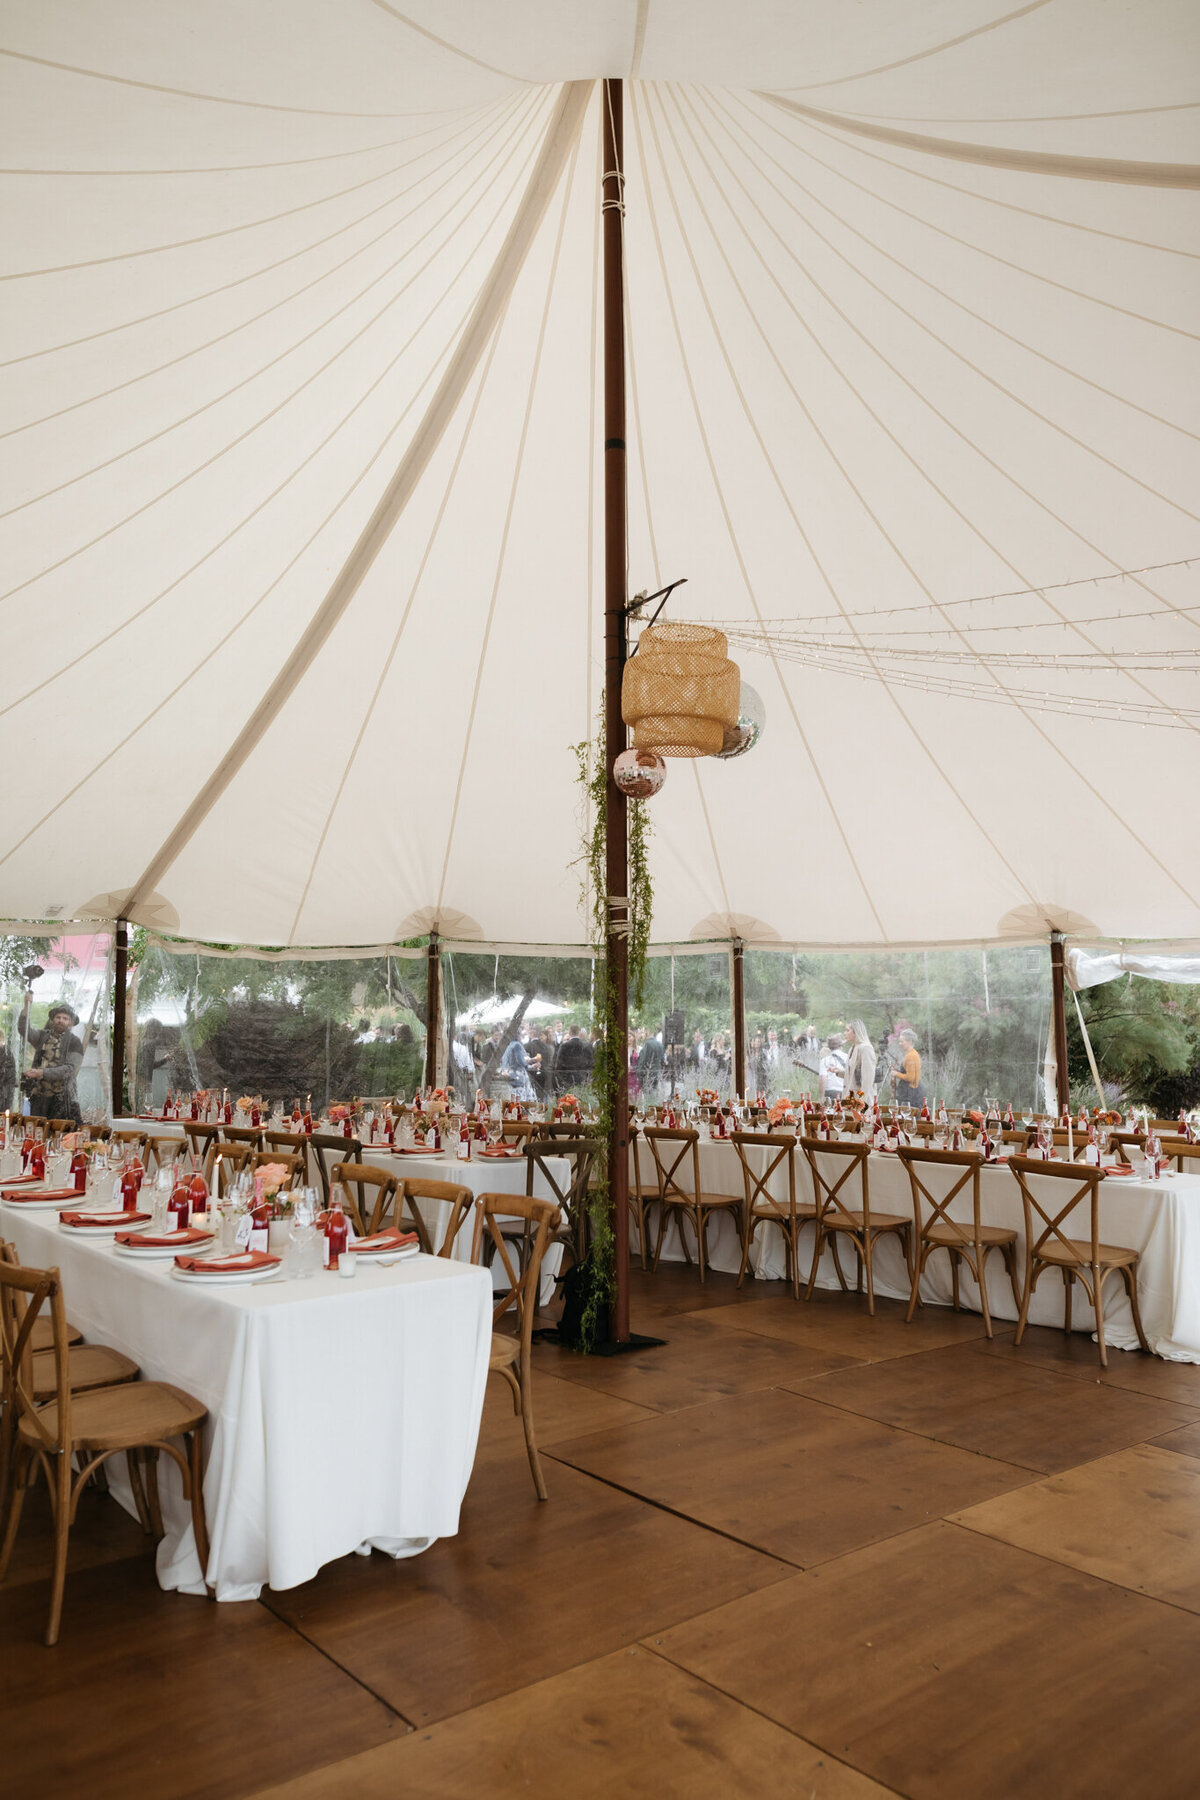 Tented reception by Perspective Events Inc, event decor rental and design in Kelowna, BC. Featured on the Brontë Bride Vendor Guide.